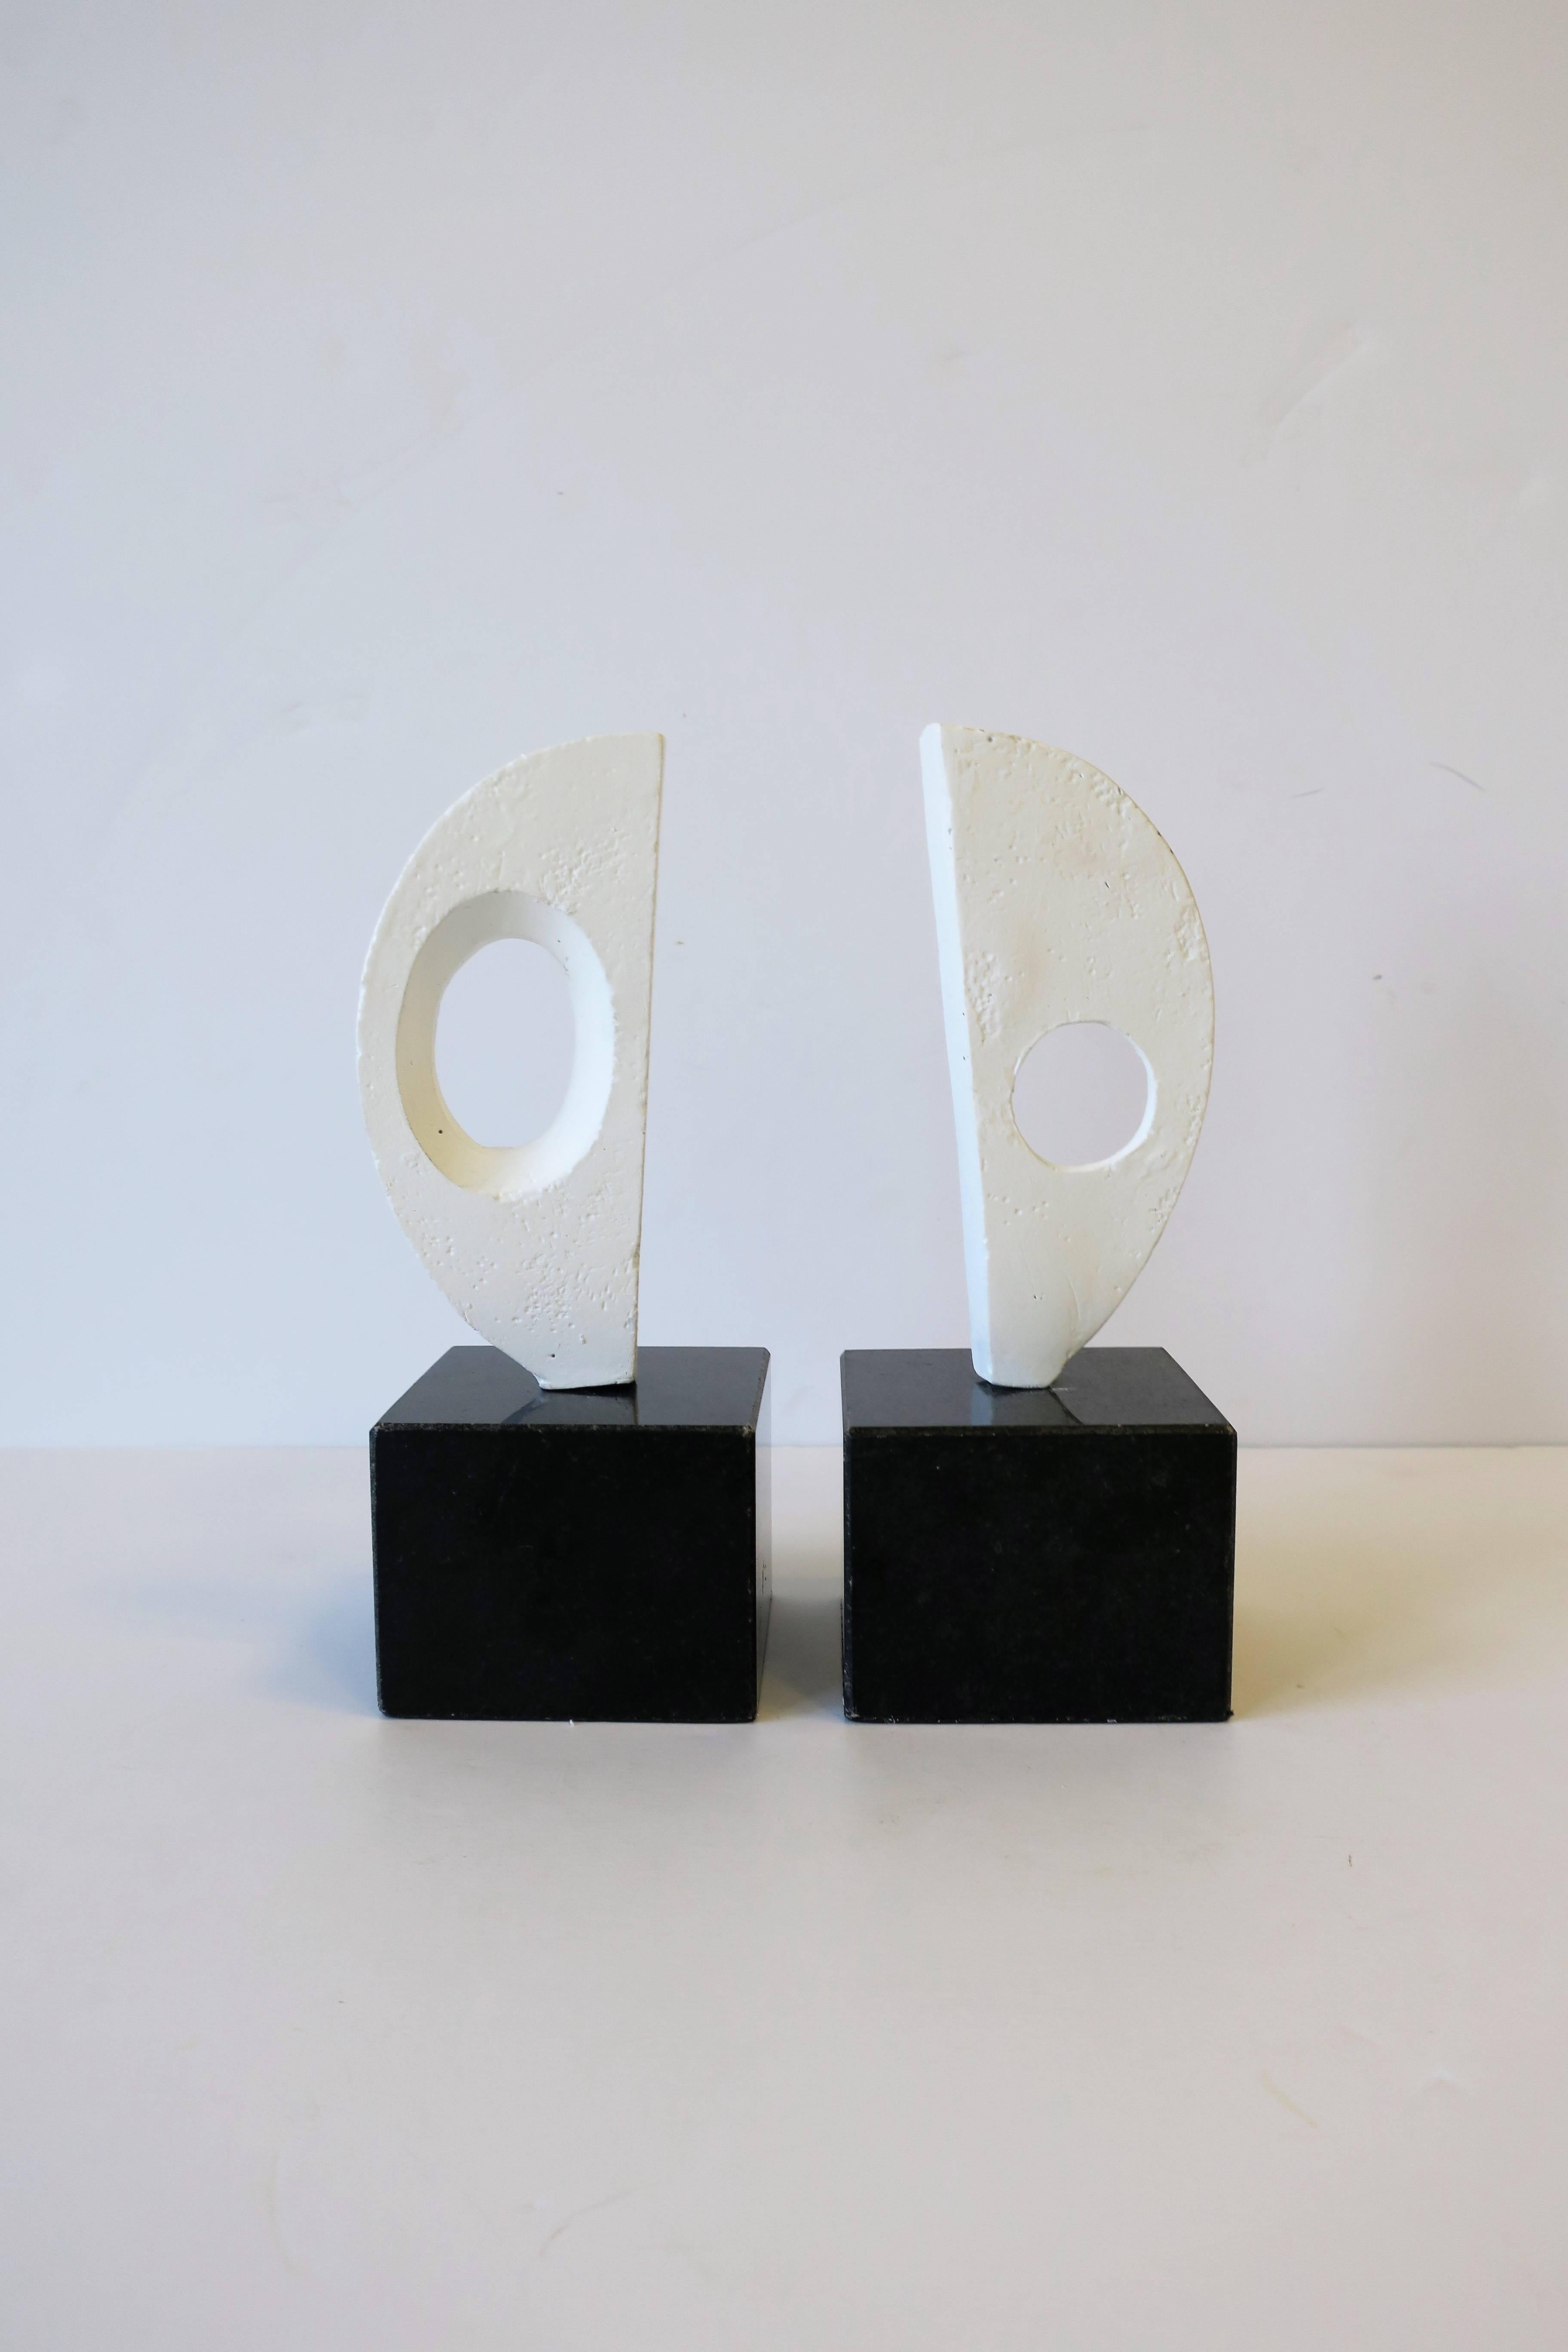 20th Century Pair of Black and White Abstract Sculpture Bookends on Marble Bases